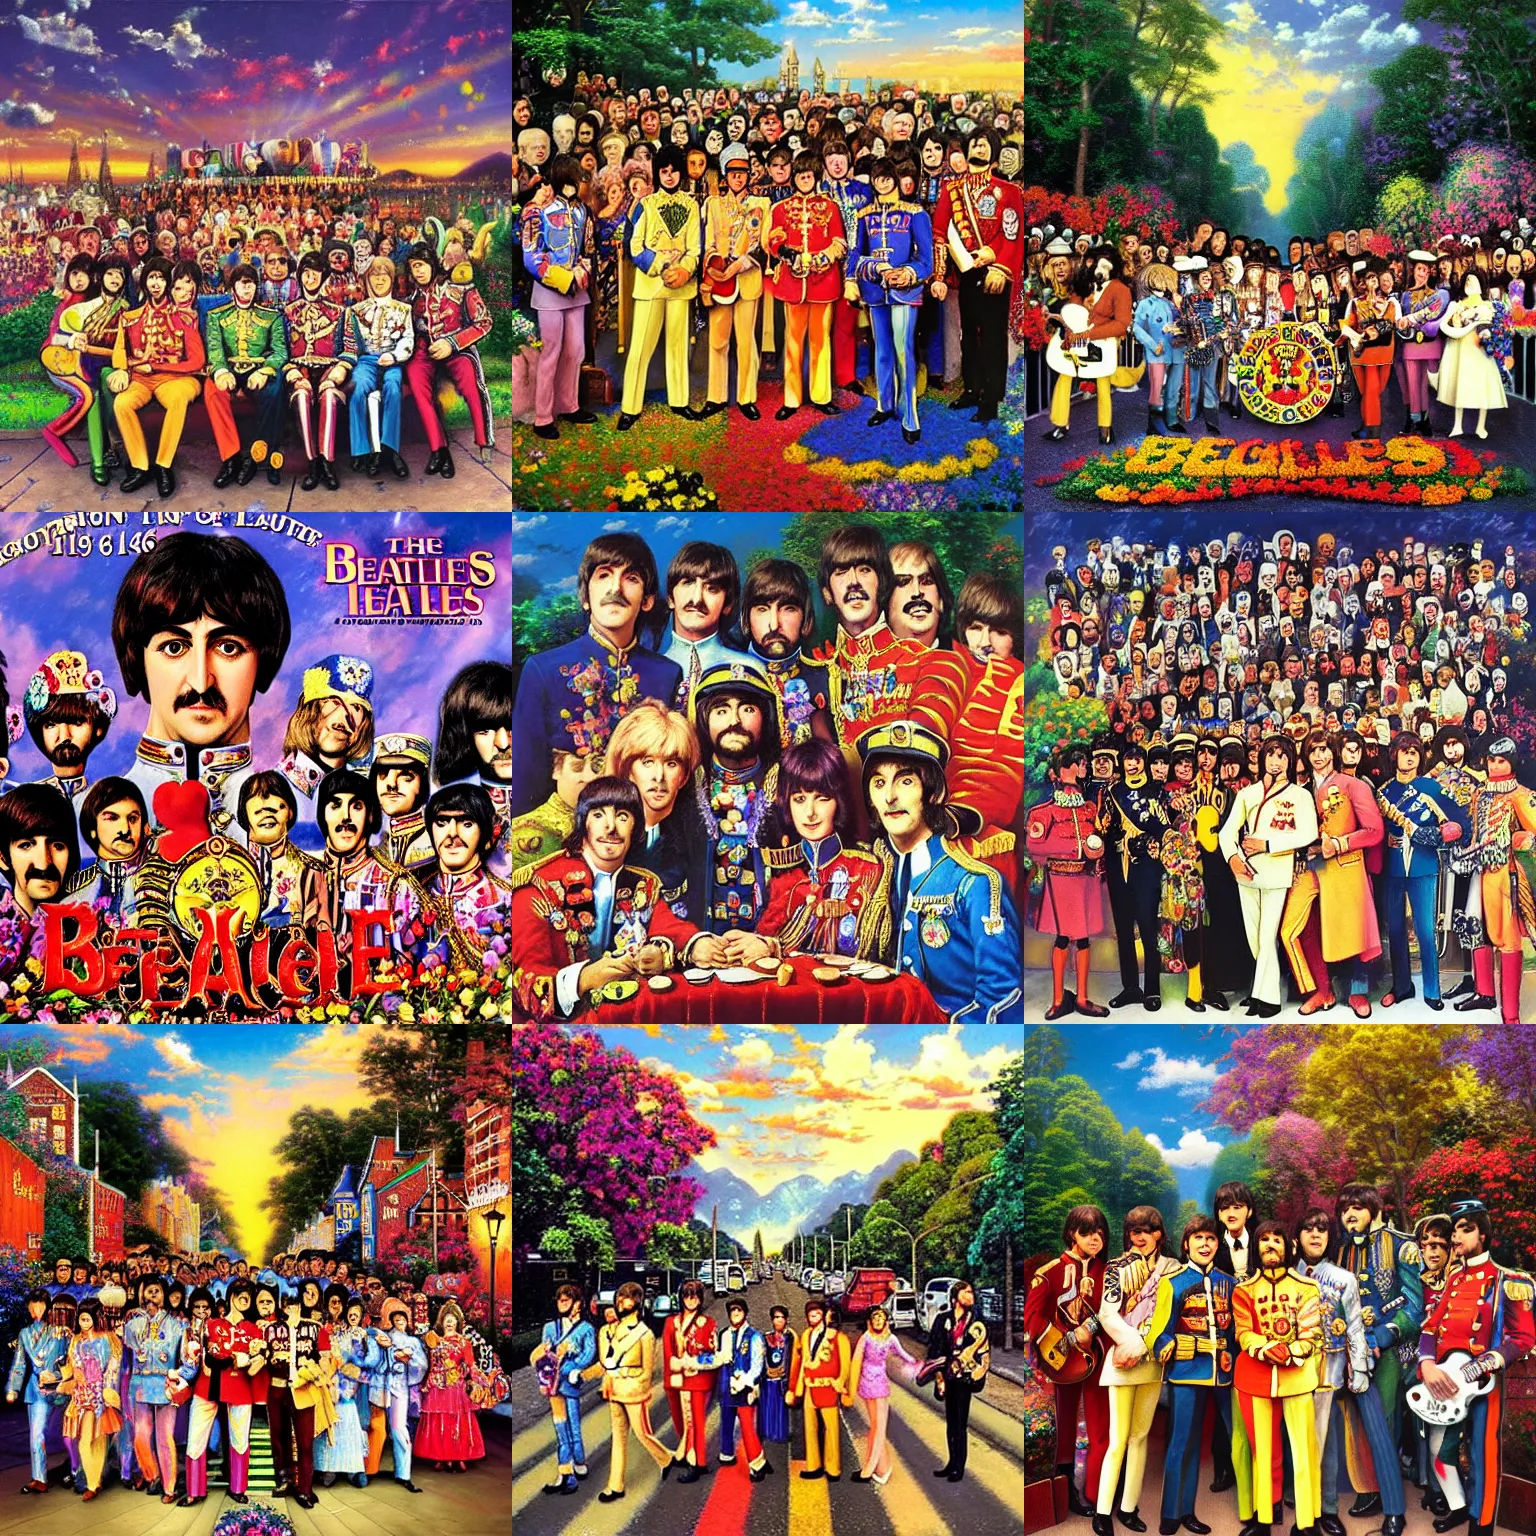 Prompt: the beatles sgt pepper's!!! by thomas kinkade!!! lonely hearts club band ( 1 9 6 7 ) album cover!!!!!!!!!!!!!!!!!!!!!!!!!!!!!! by thomas kinkade